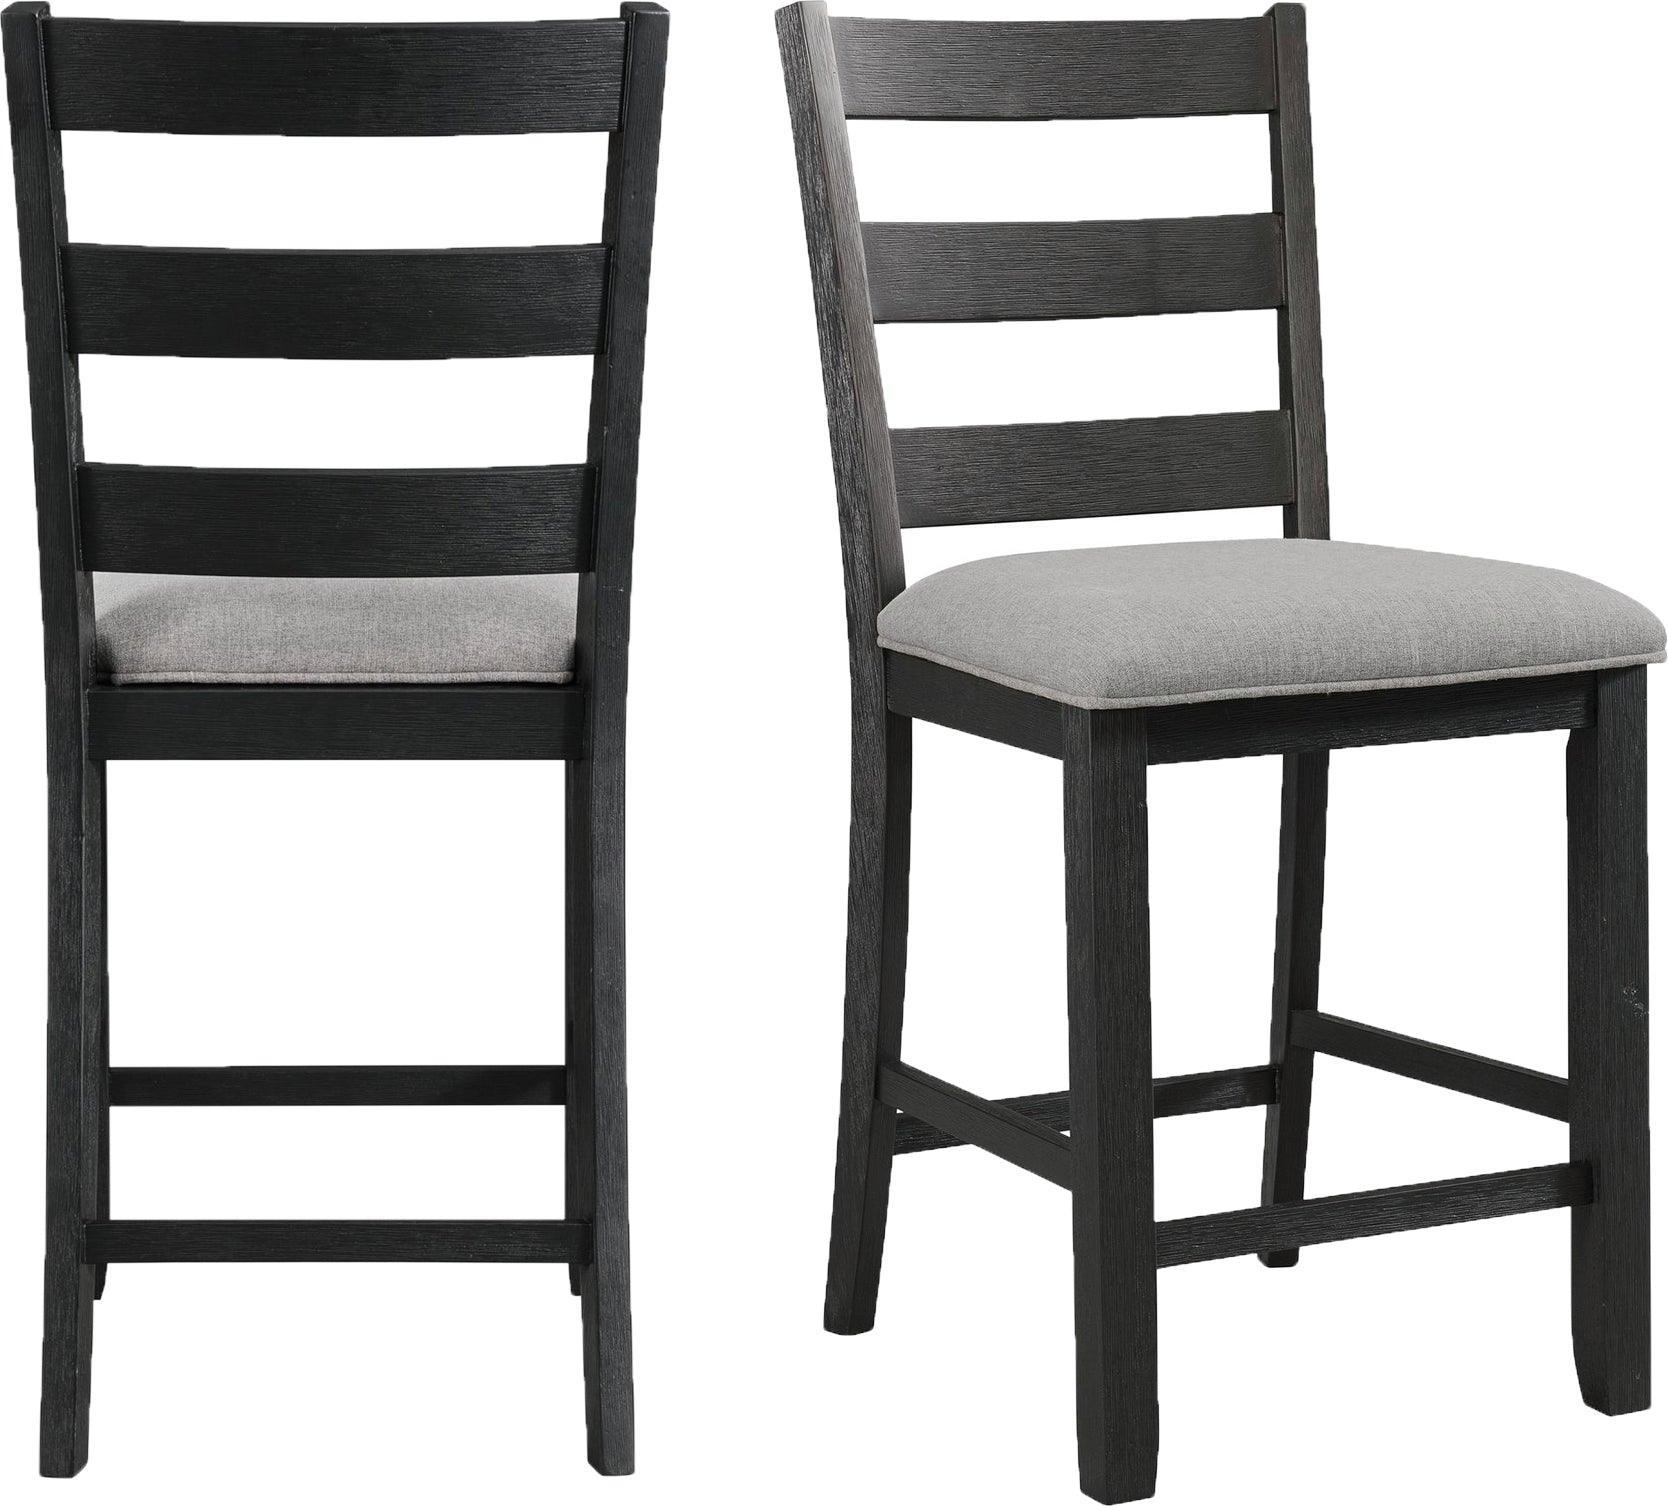 Elements Barstools - Kona Counter Height Side Chair Set in Black